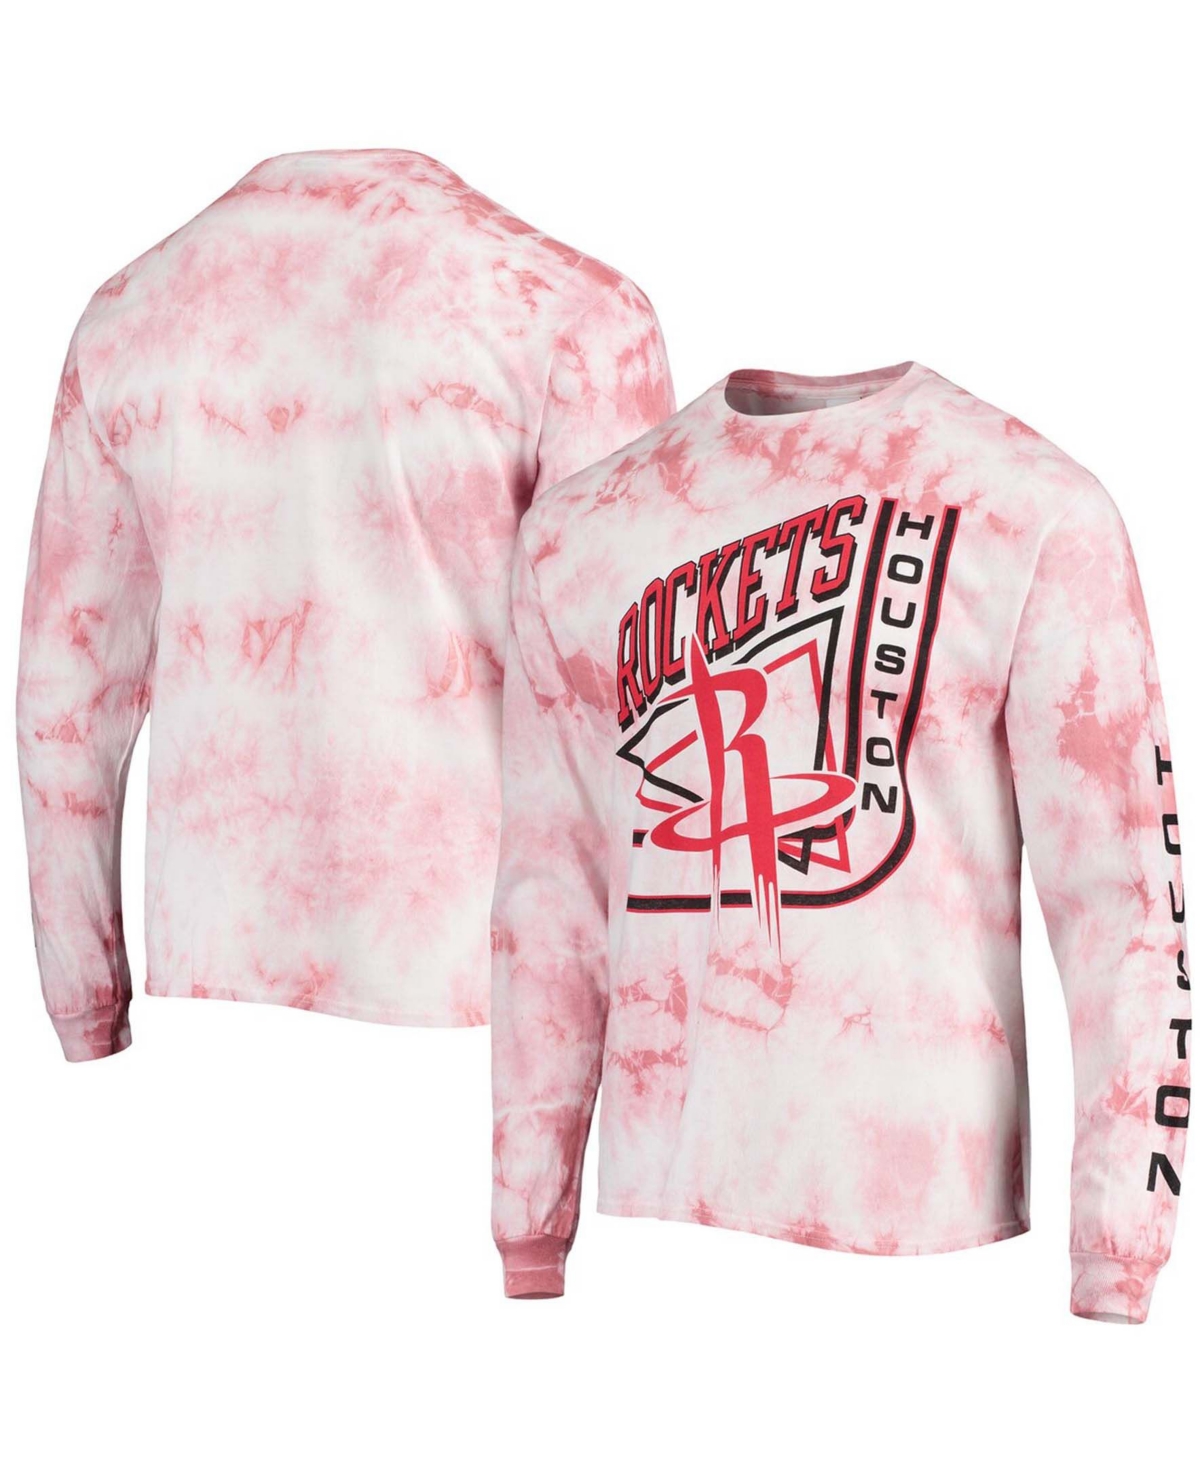 Men's Red Houston Rockets Throwback Tie-Dye Long Sleeve T-shirt - Red